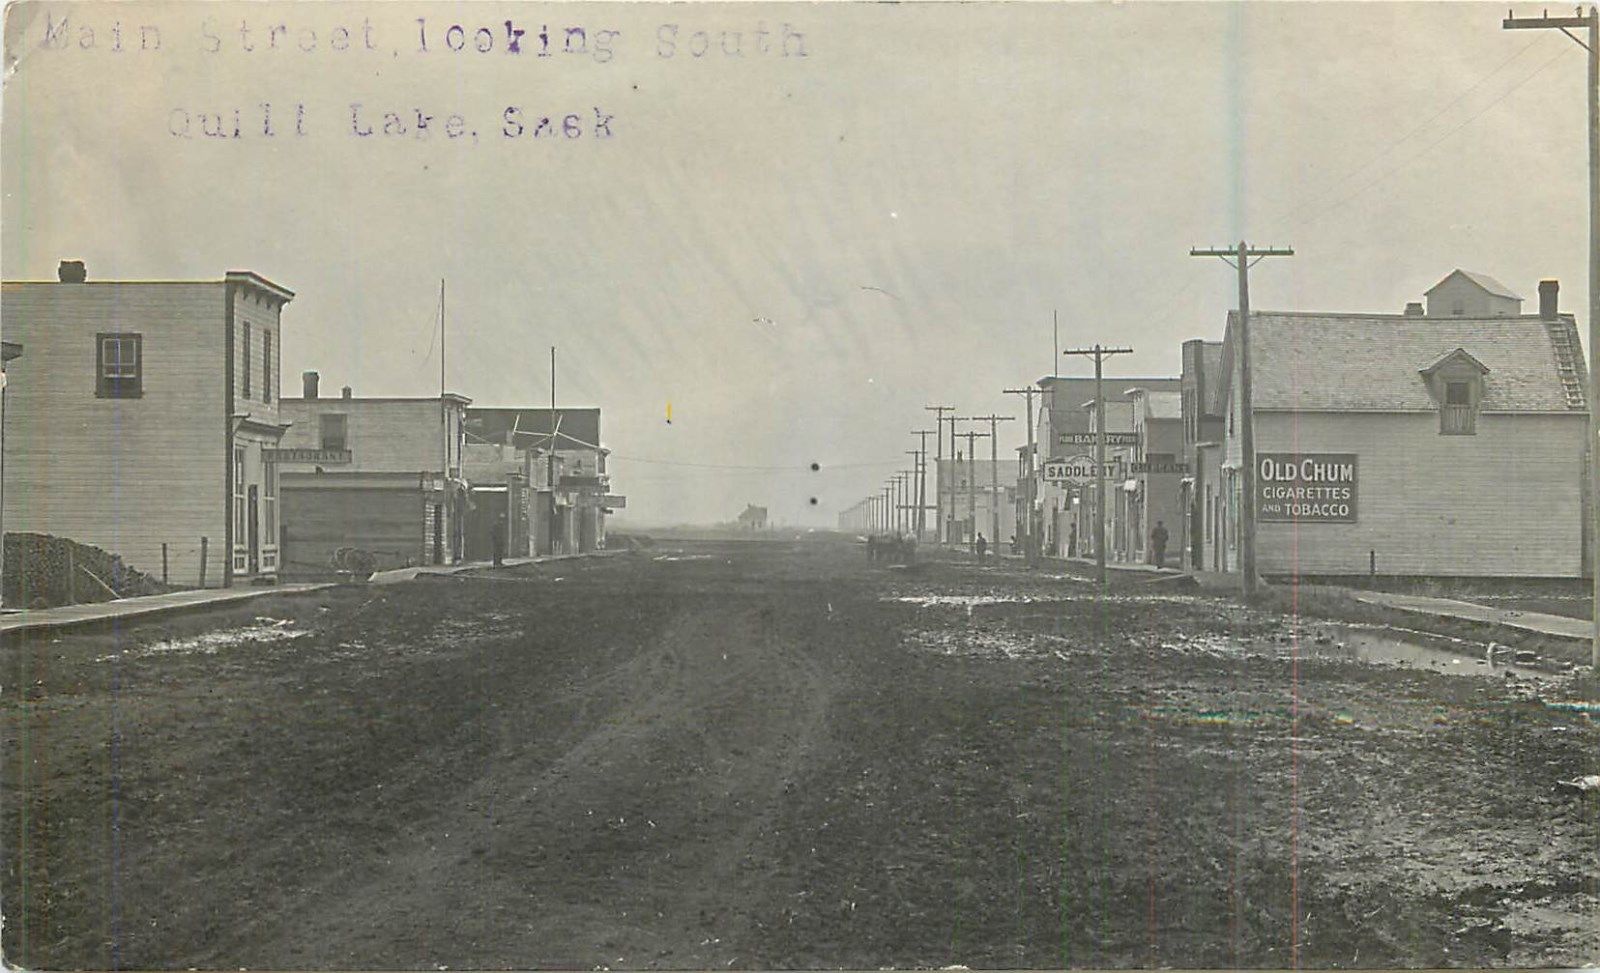 1-quill lake main street south